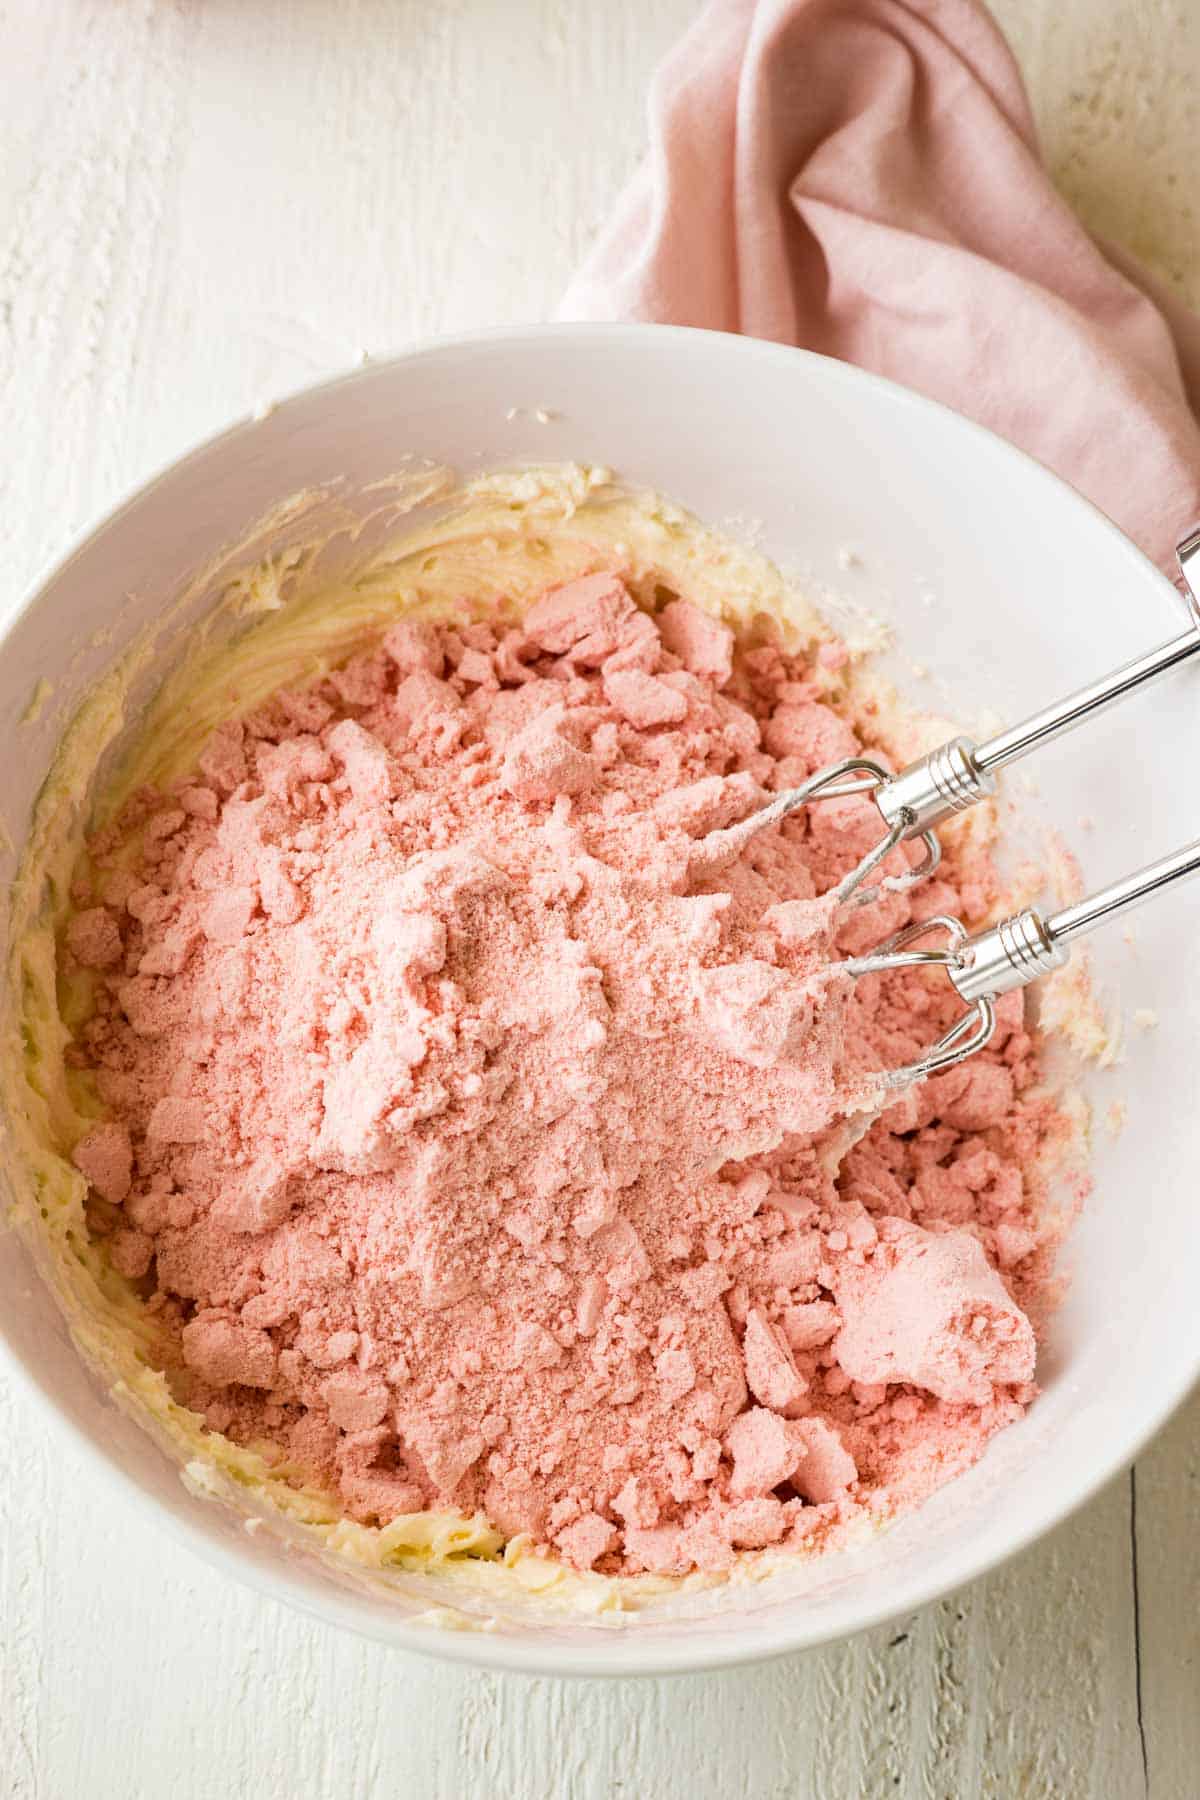 A strawberry cake mix dumped in a mixing bowl with electric beaters.